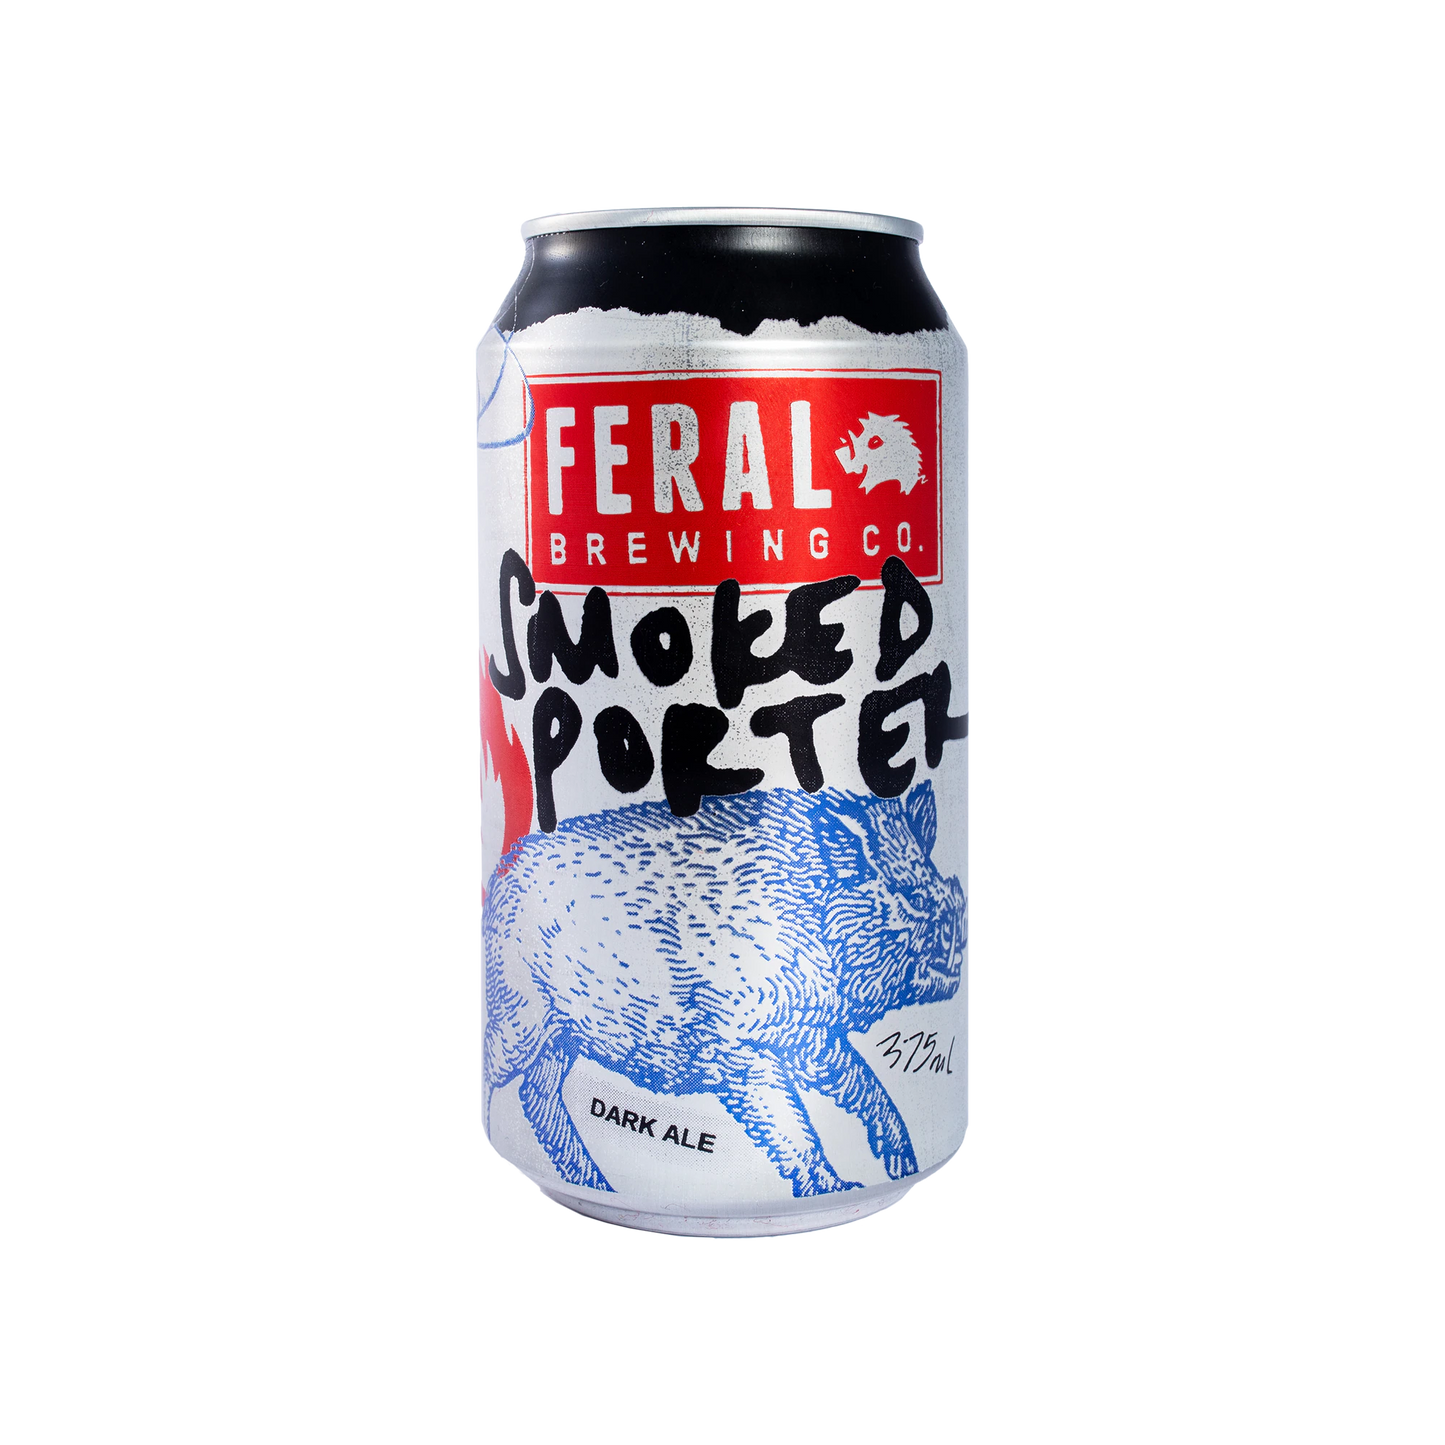 Feral Brewing Co Smoked Porter 375ml